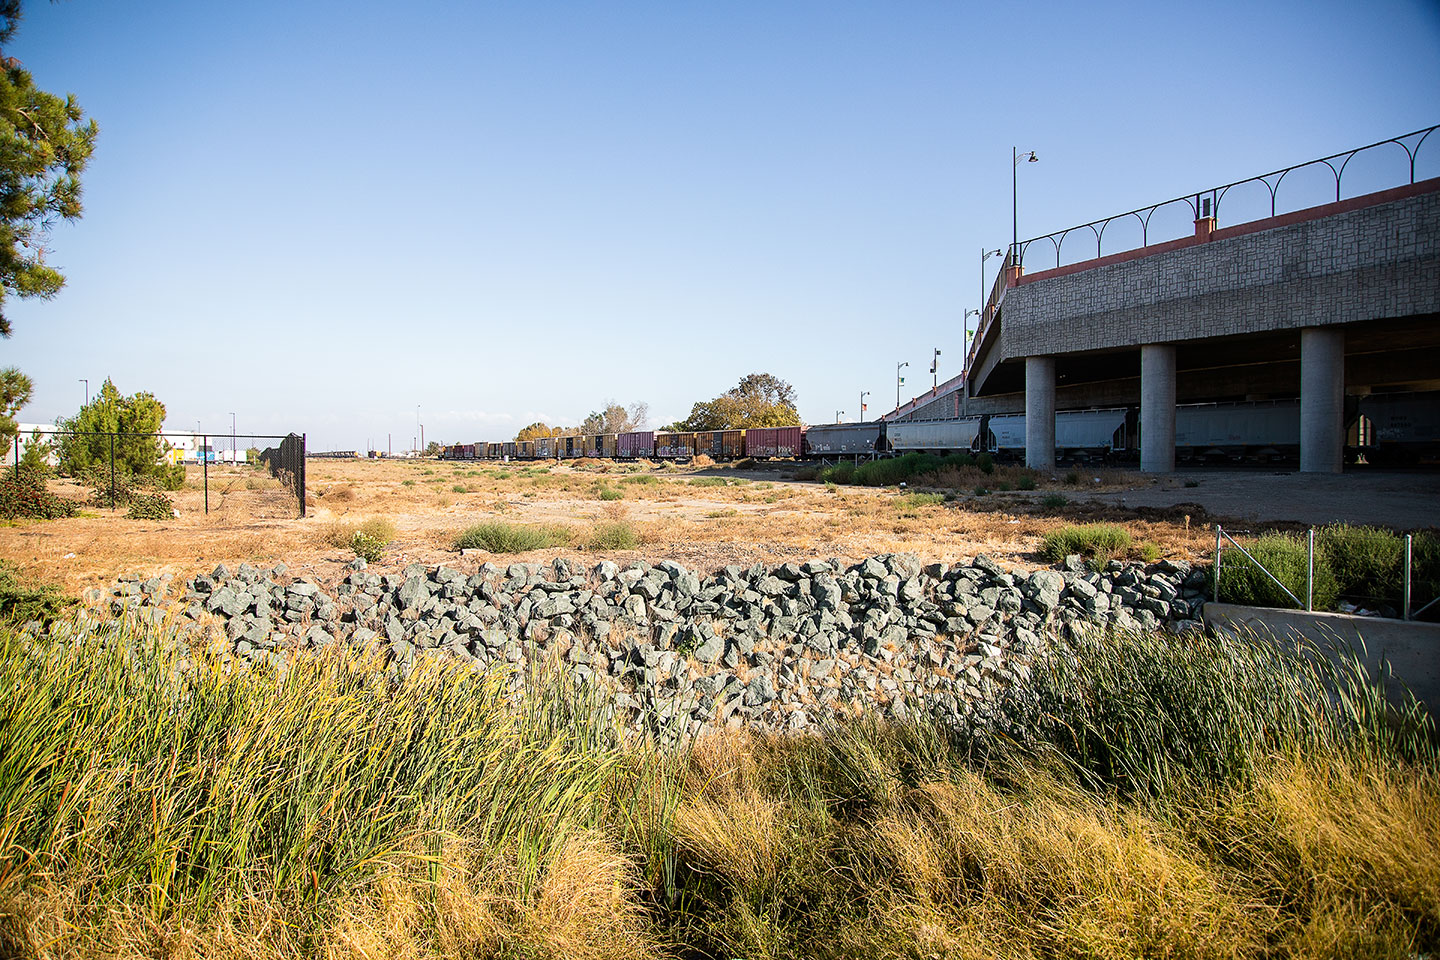 We designed a shorter highly skewed structure in combination with retaining walls and embankment fill at the approaches to span the Union Pacific Railroad mainline tracks.